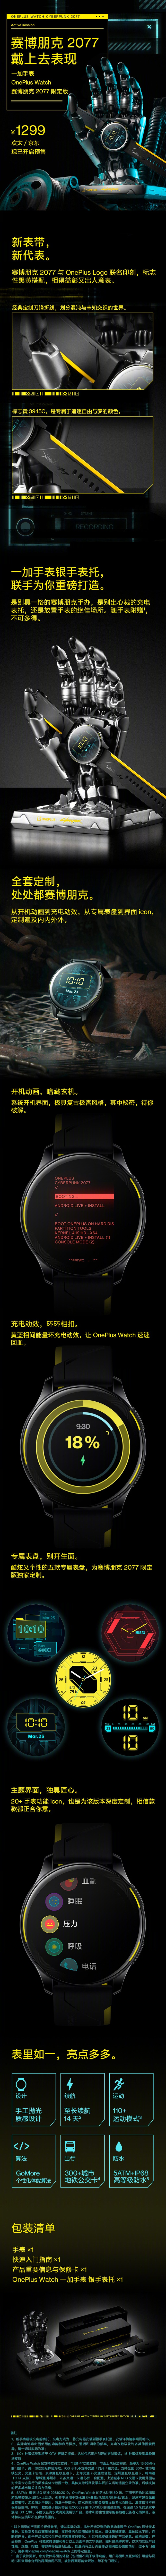 OnePlus Watch Cyberpunk 2077 limited edition now on pre-order in China with cool hand-shaped stand